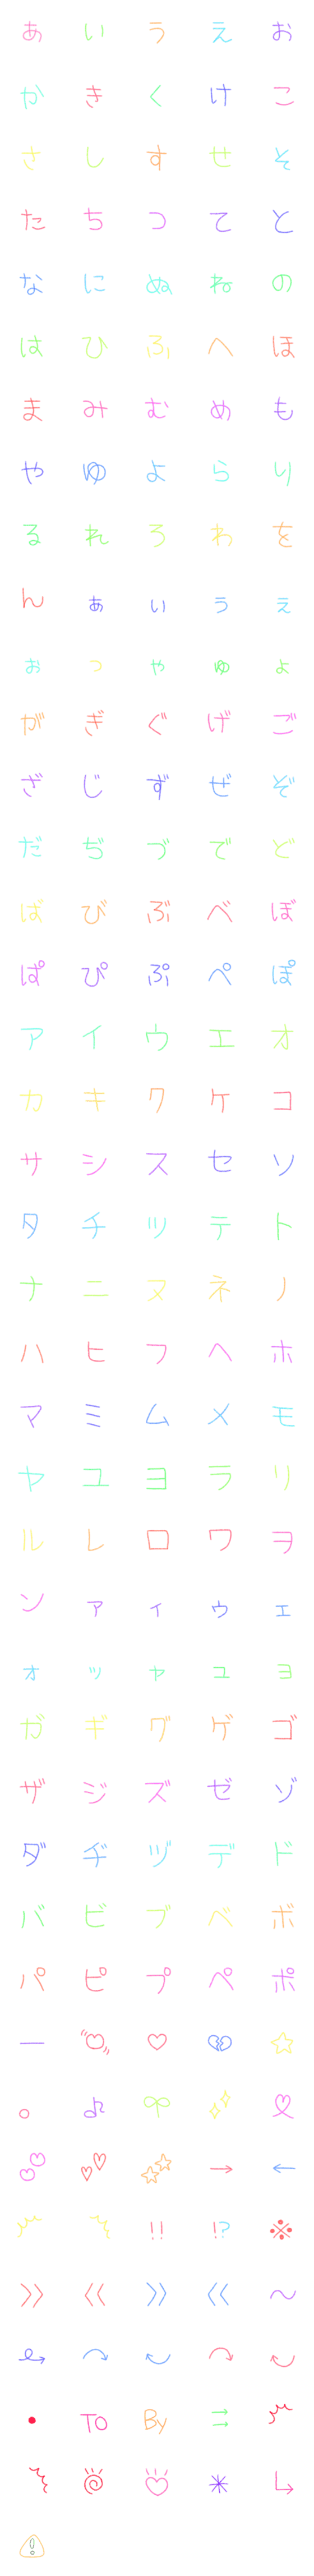 [LINE絵文字]手書き風 文字 01の画像一覧